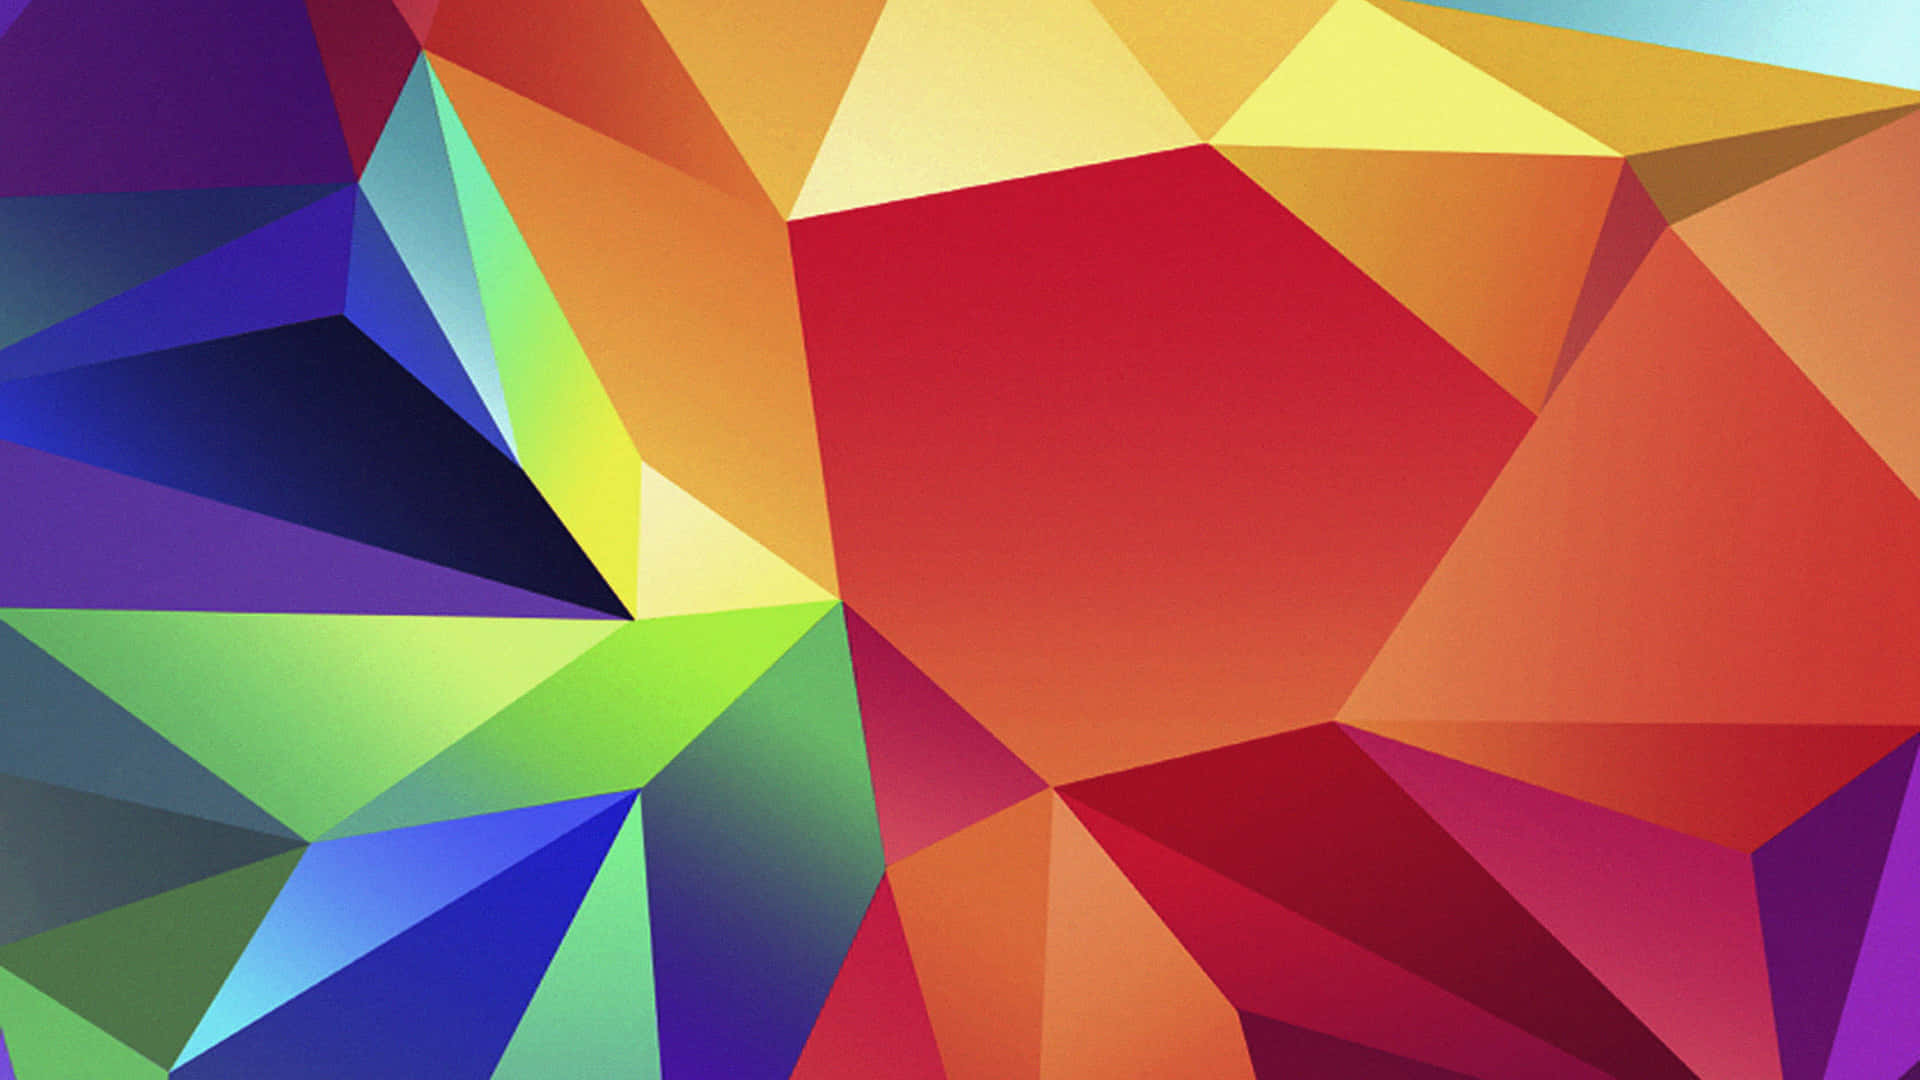 HD Pattern Colorful Abstract Shapes Wallpaper